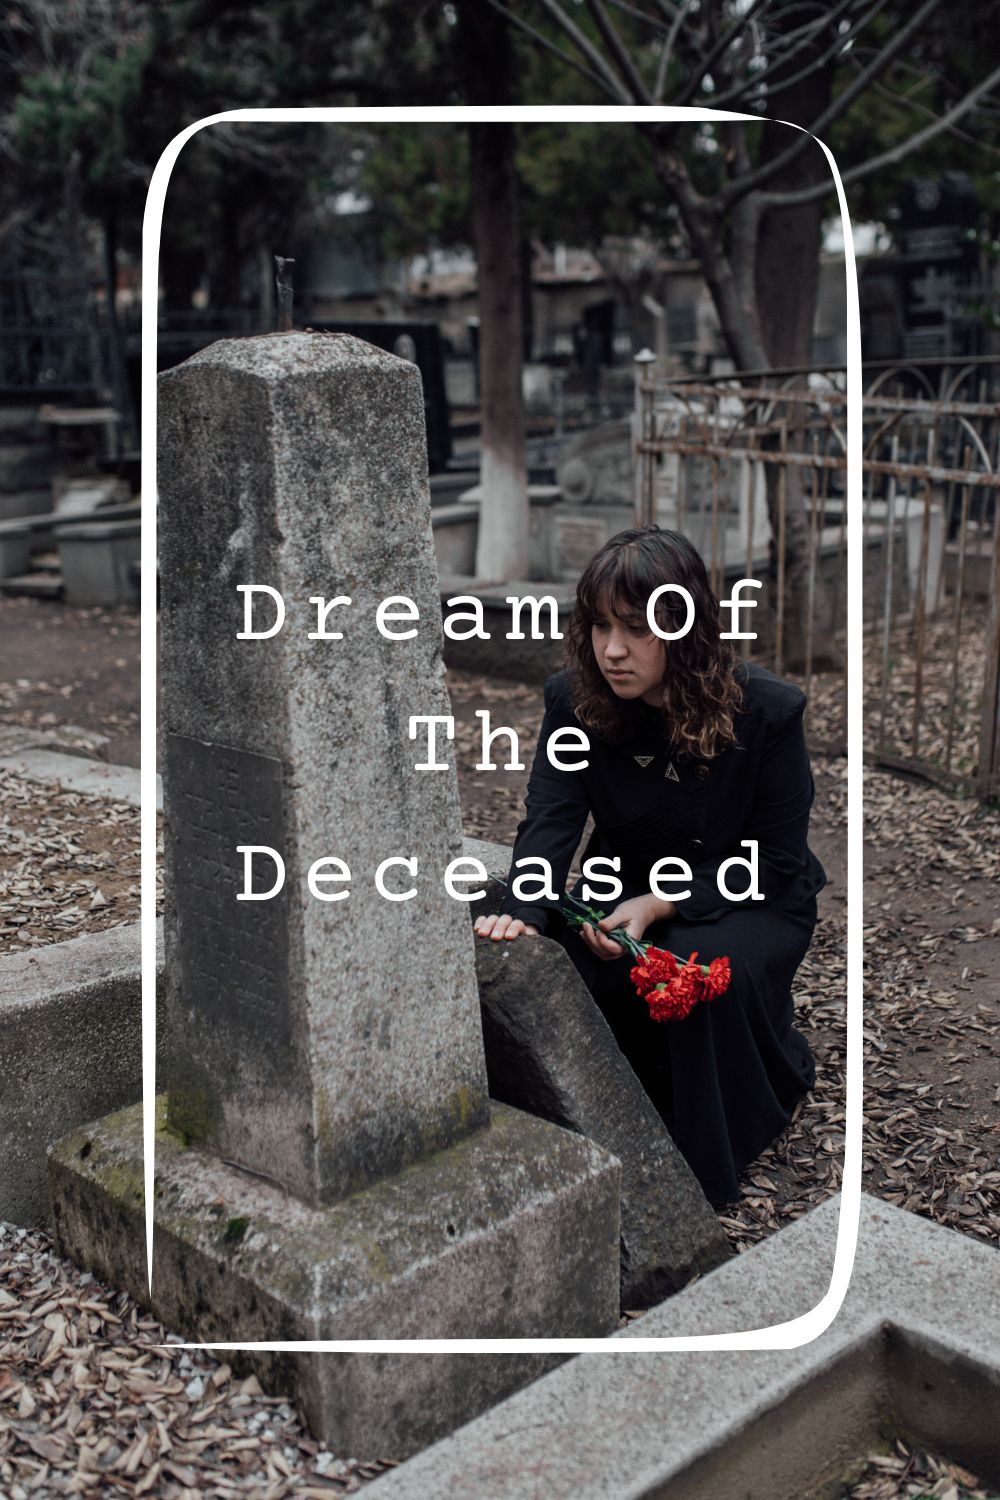 Dream Of The Deceased Meanings 1